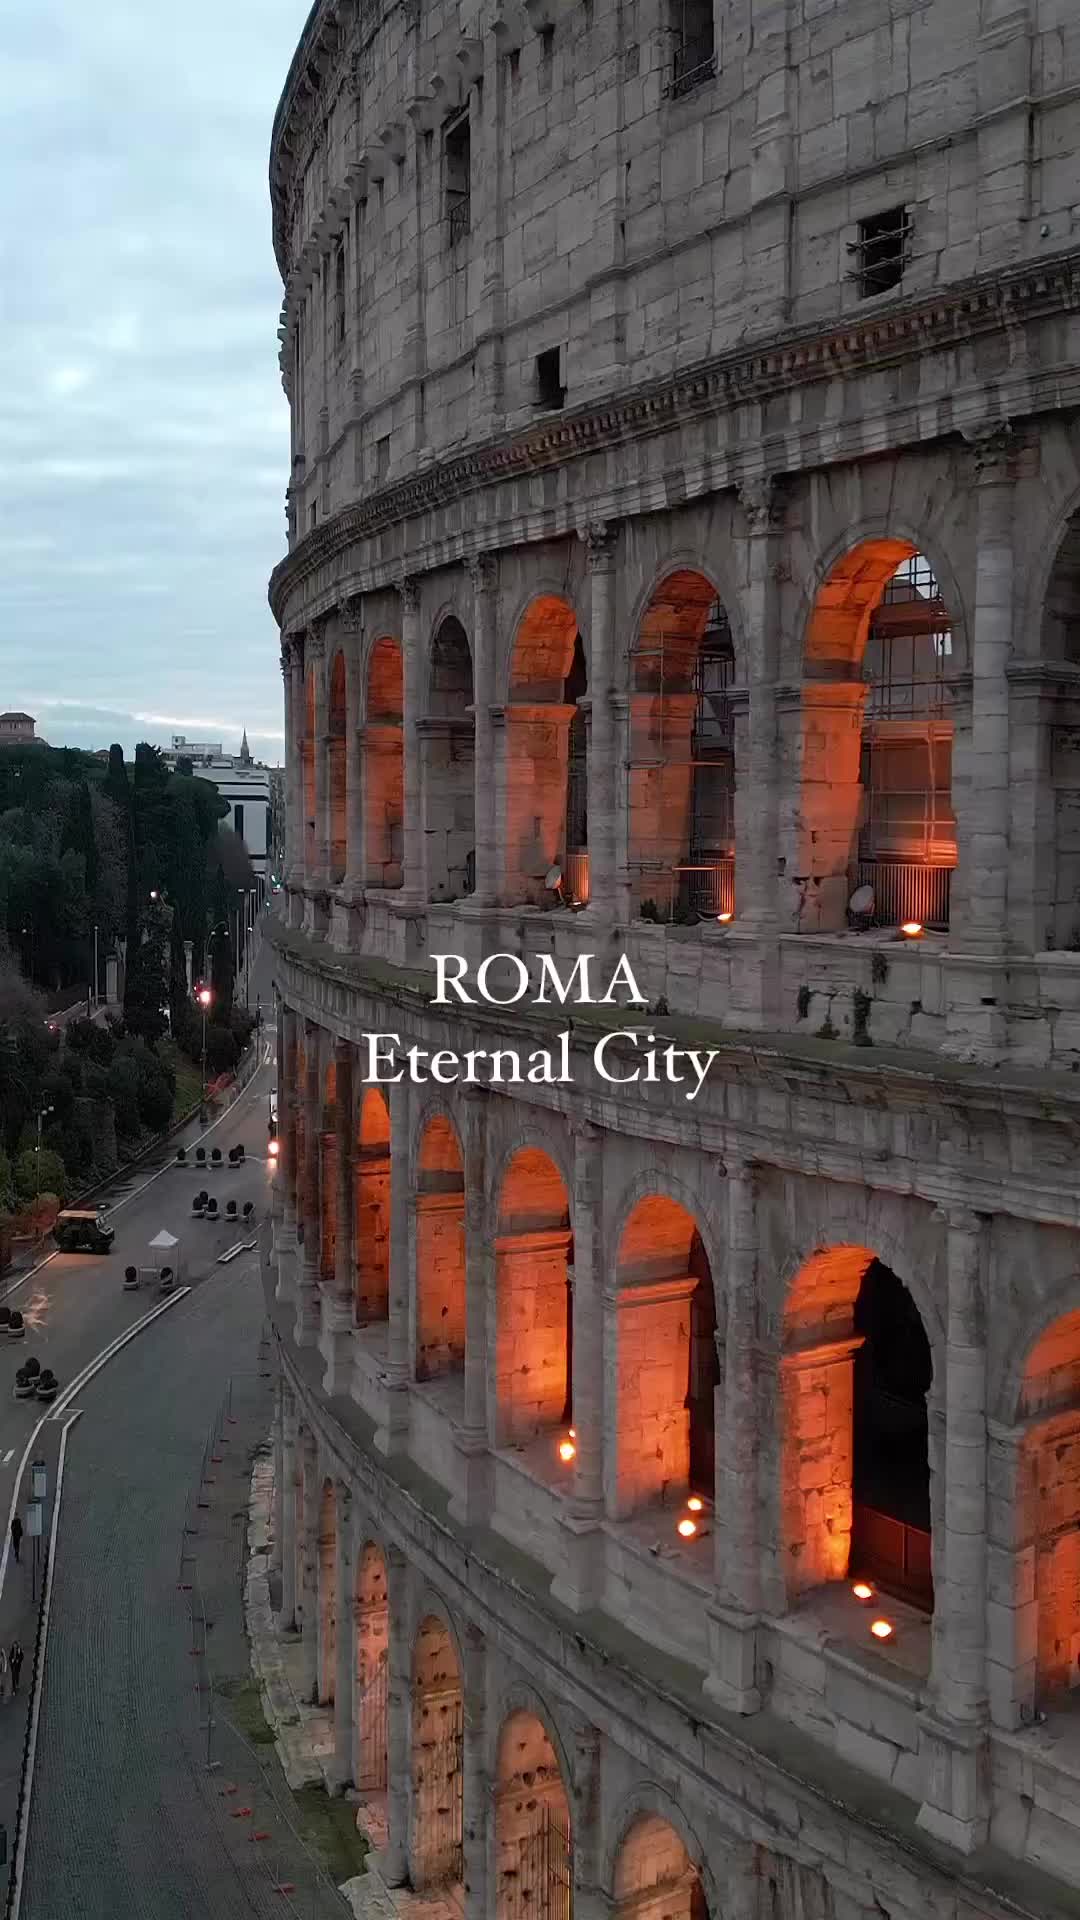 Rome Eternal City: Discover Its Timeless Beauty